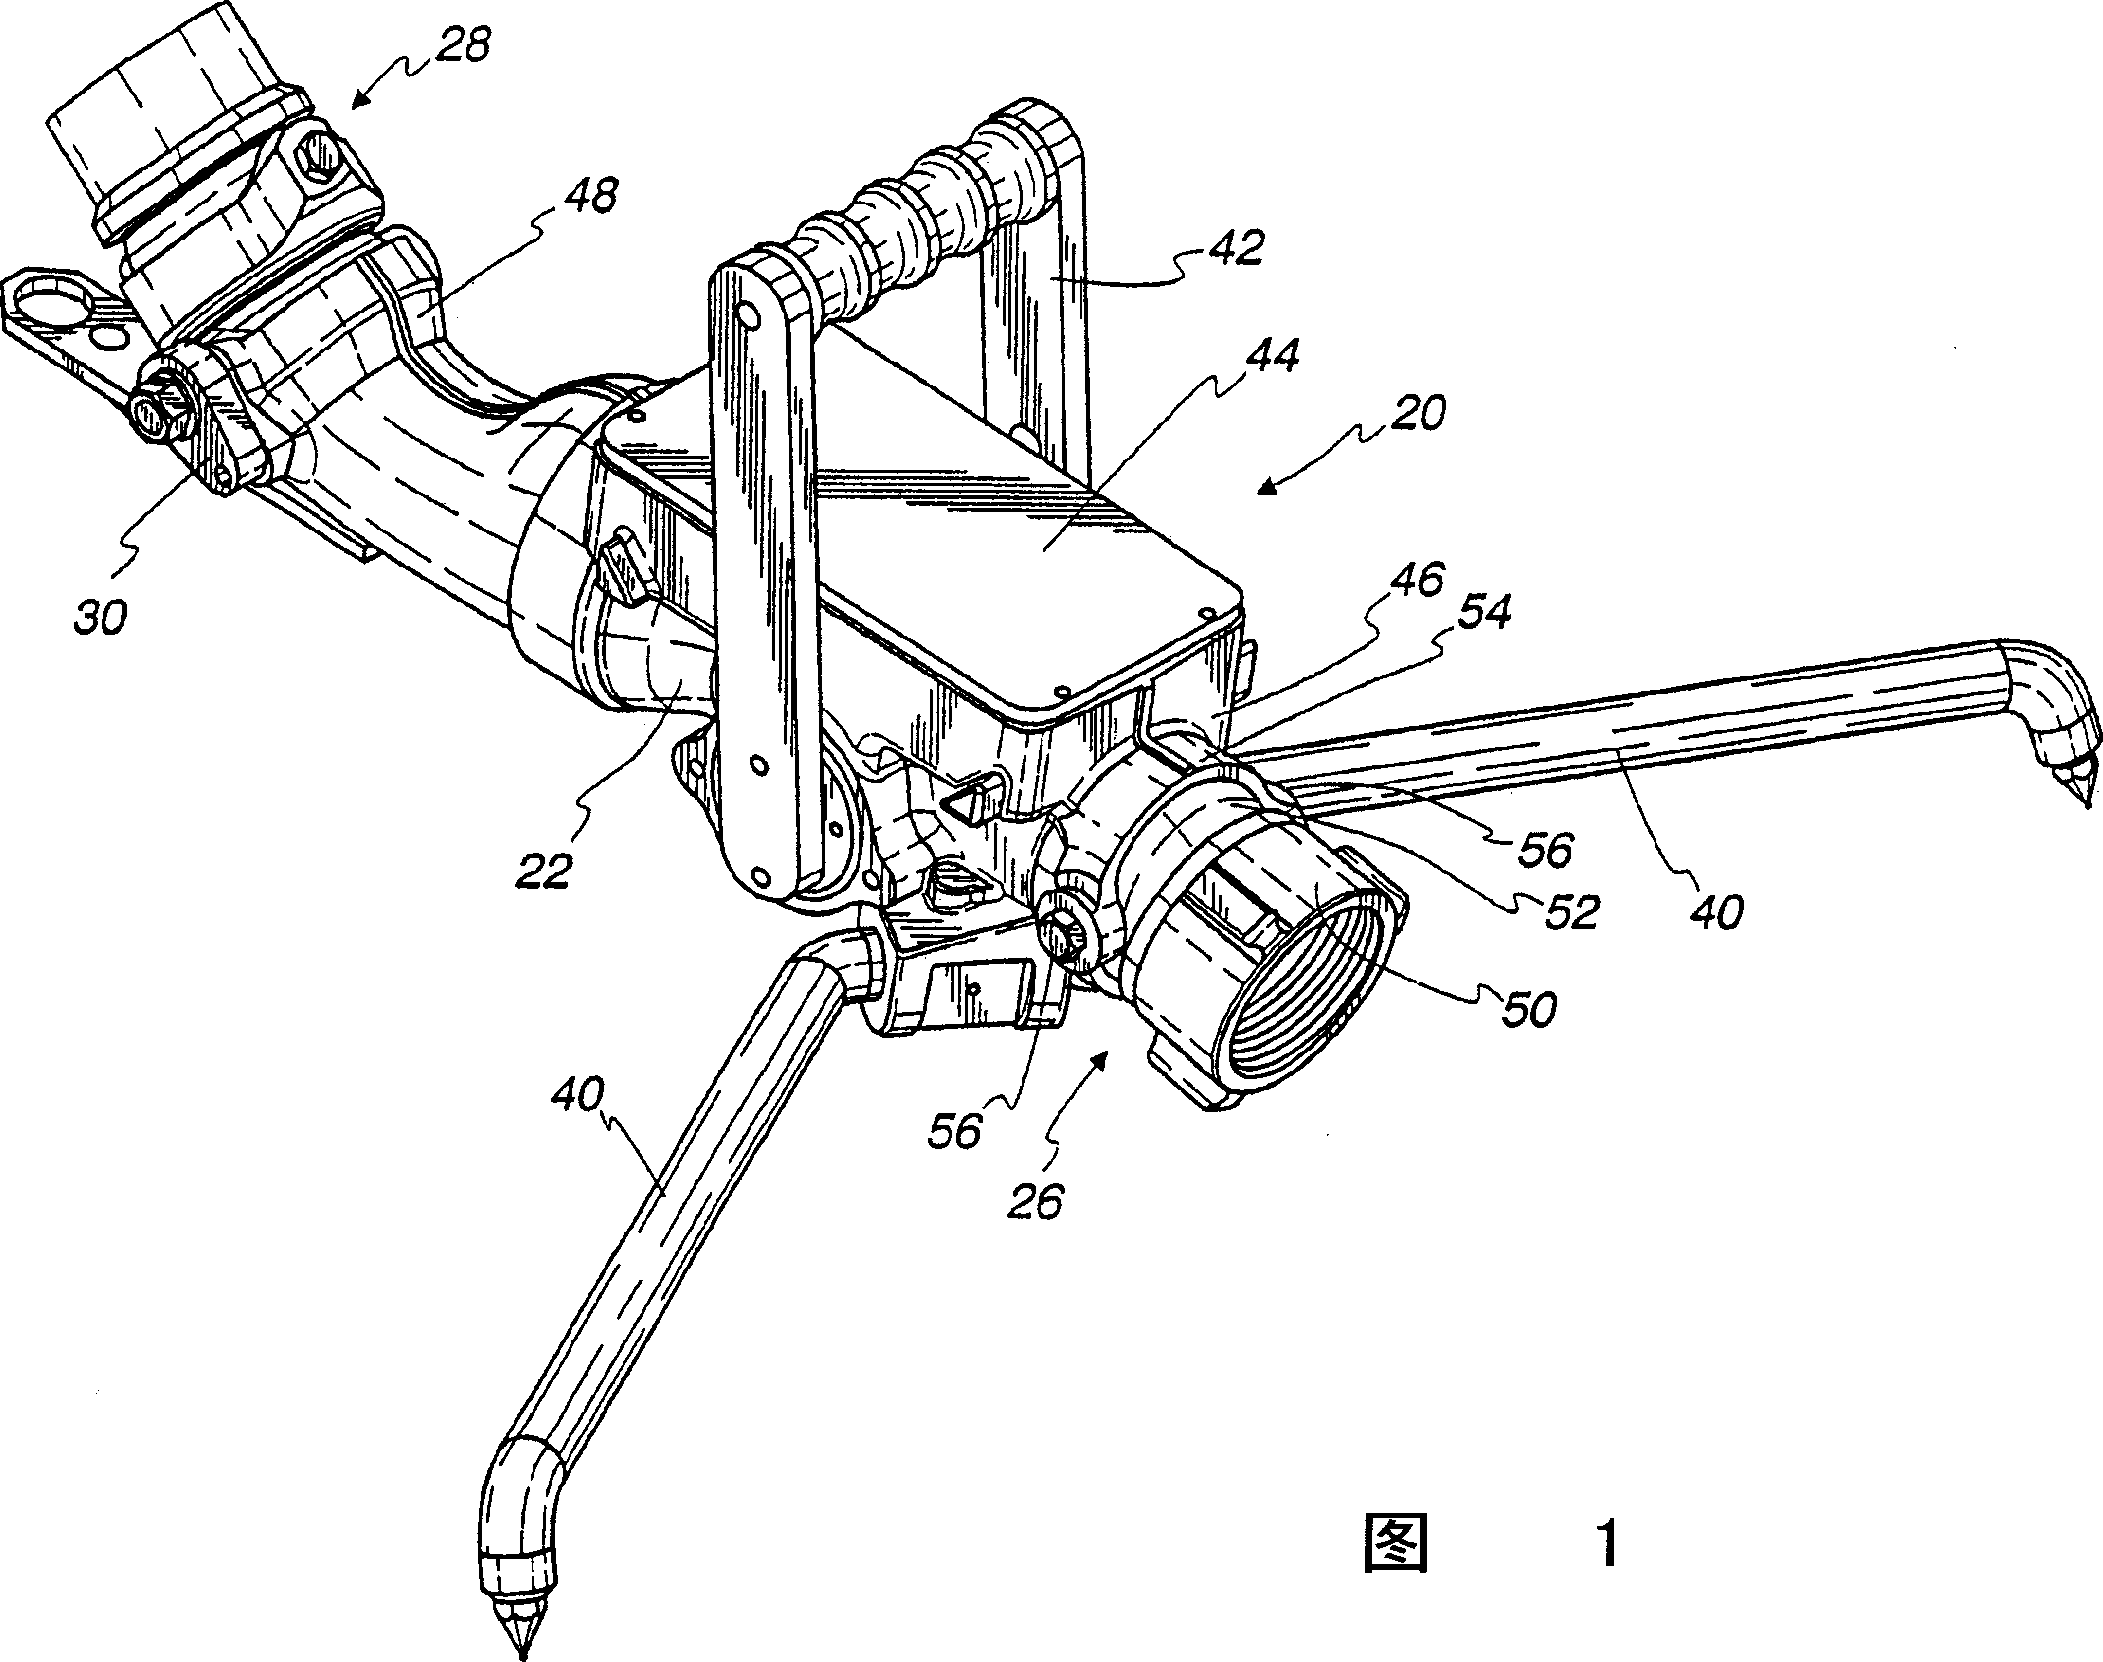 Pivoting fluid conduit joint and one-way brake